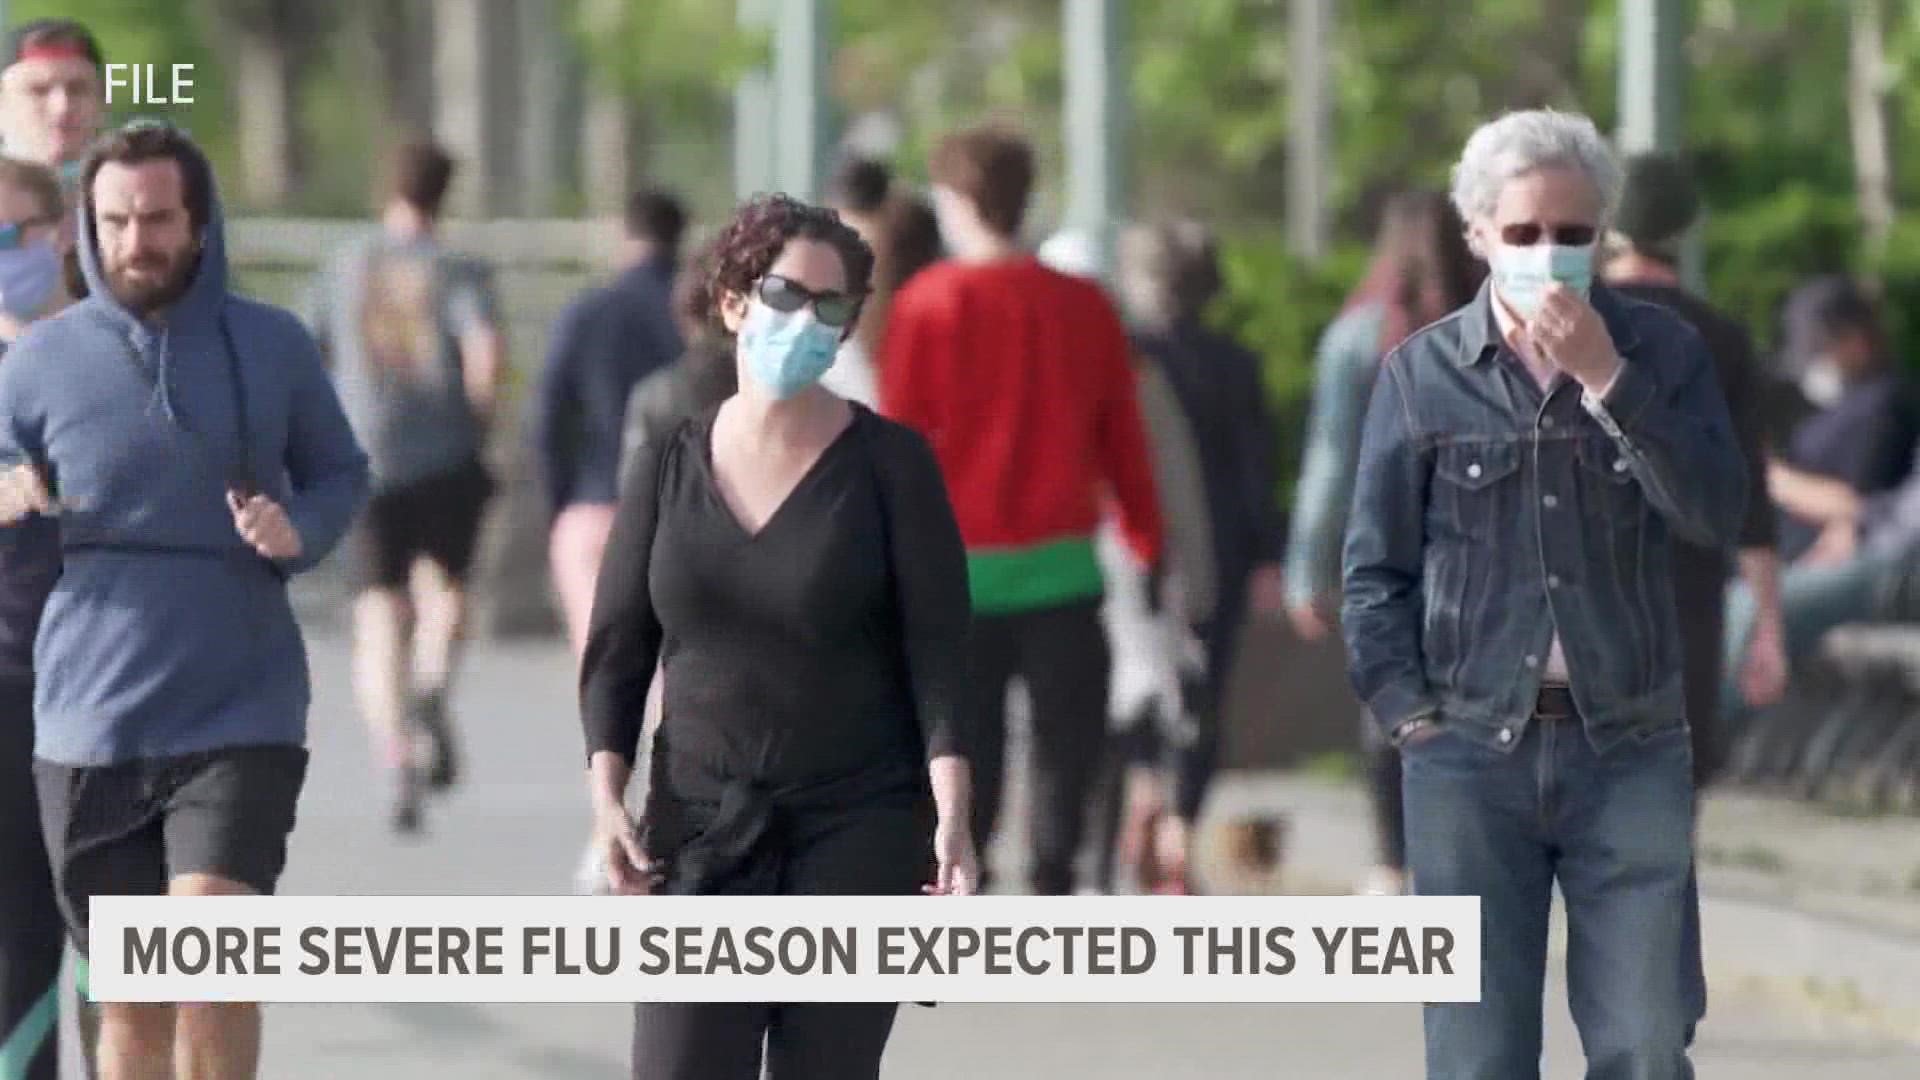 Different parts of the country are seeing an earlier and faster spread of the flu this year, with upticks in the south and on the east coast.